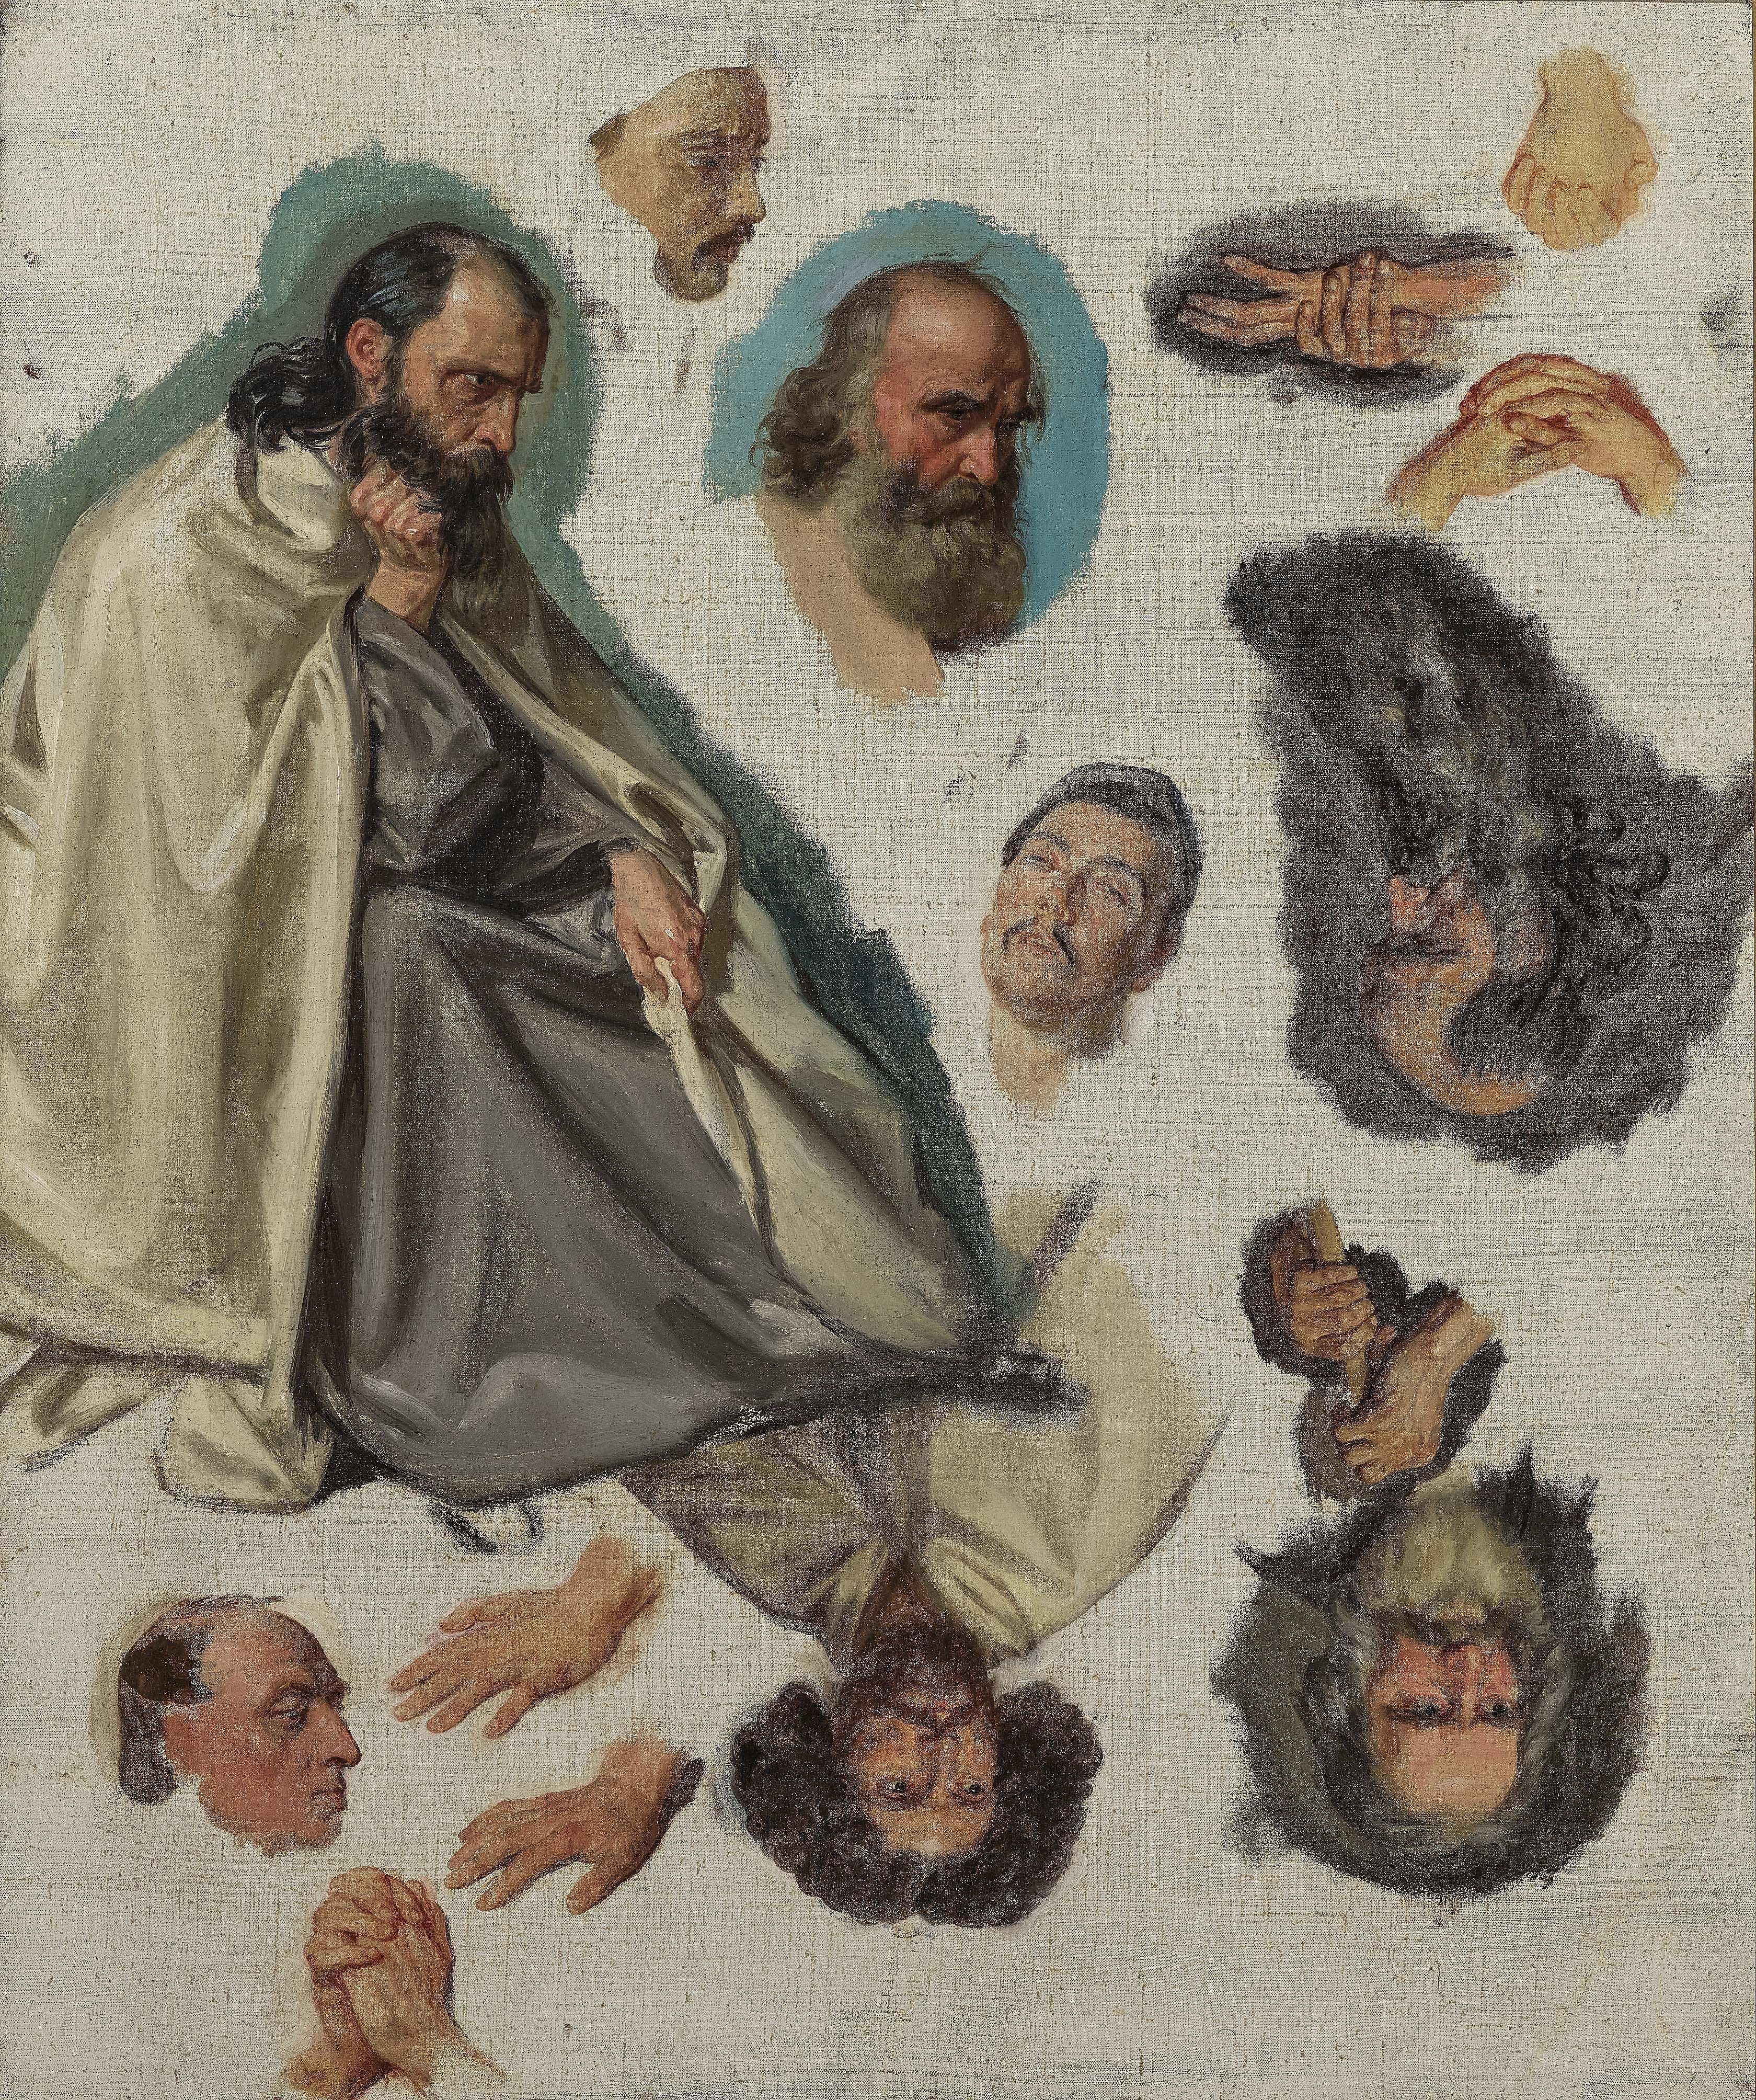 Figure-, head- and hand studies for the painting of the church "La Madeleine" in Paris by Paul Delaroche